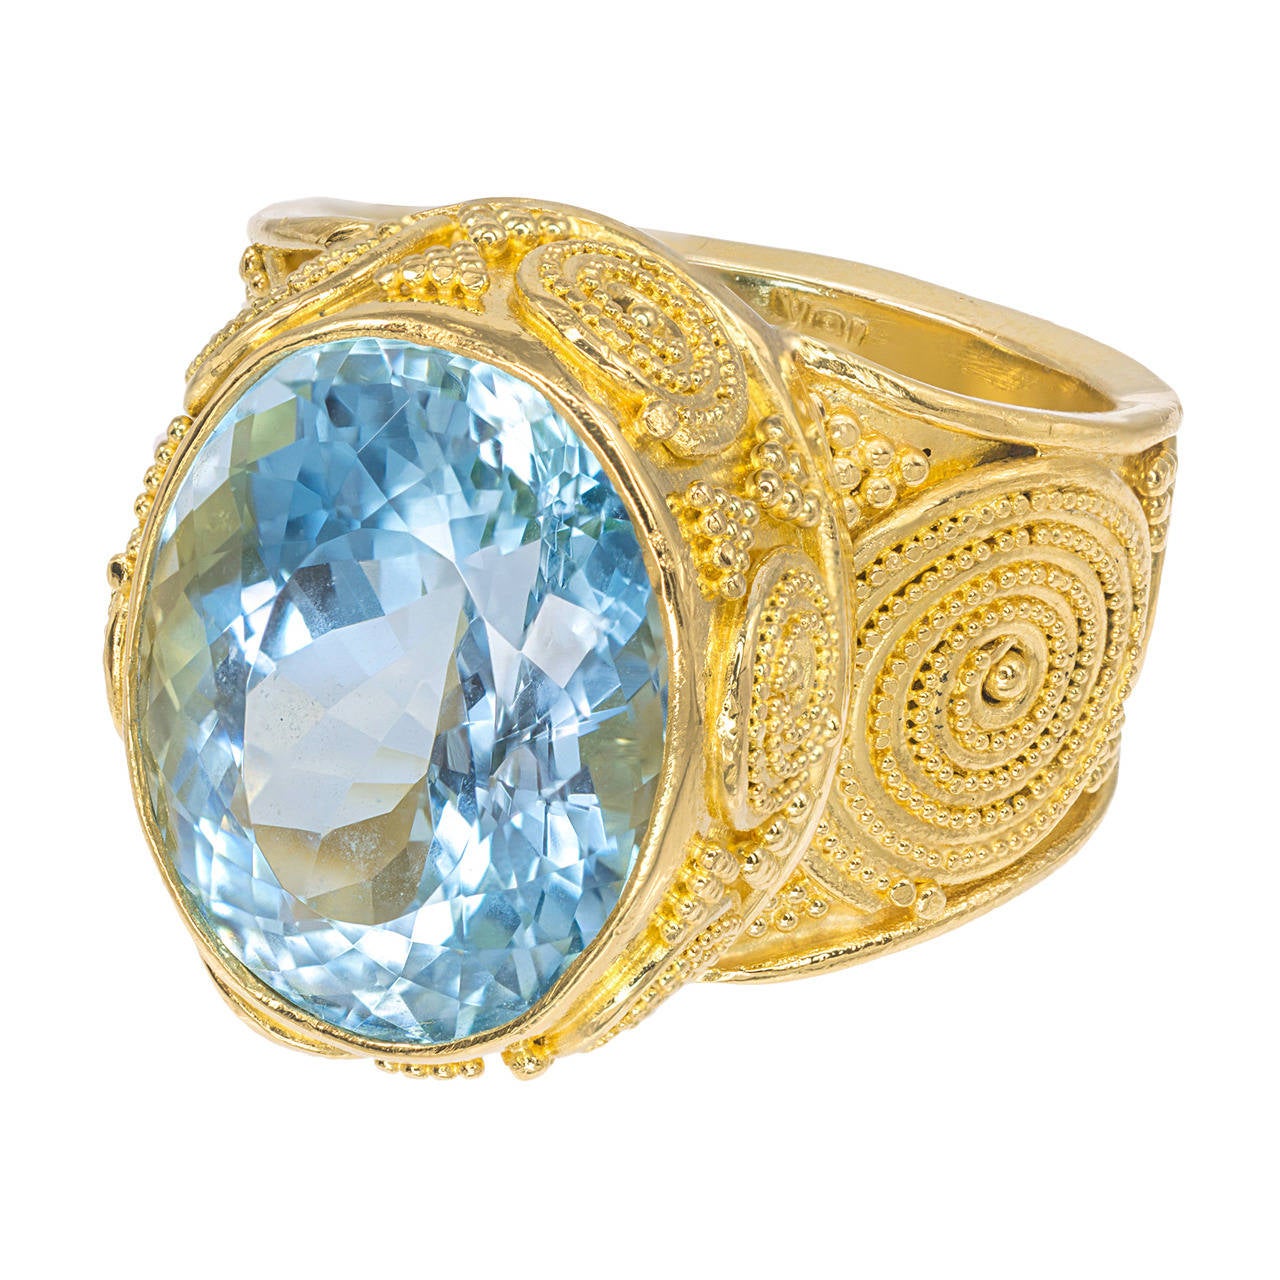 Bright well-polished blue 9.41ct aquamarine set in a handmade setting with fine rare granulated and wire work in 22k and 18k yellow gold. Signed and appraised by Luna Felix. 

1 oval extra bright greenish blue gem quality Aquamarine, approx. total